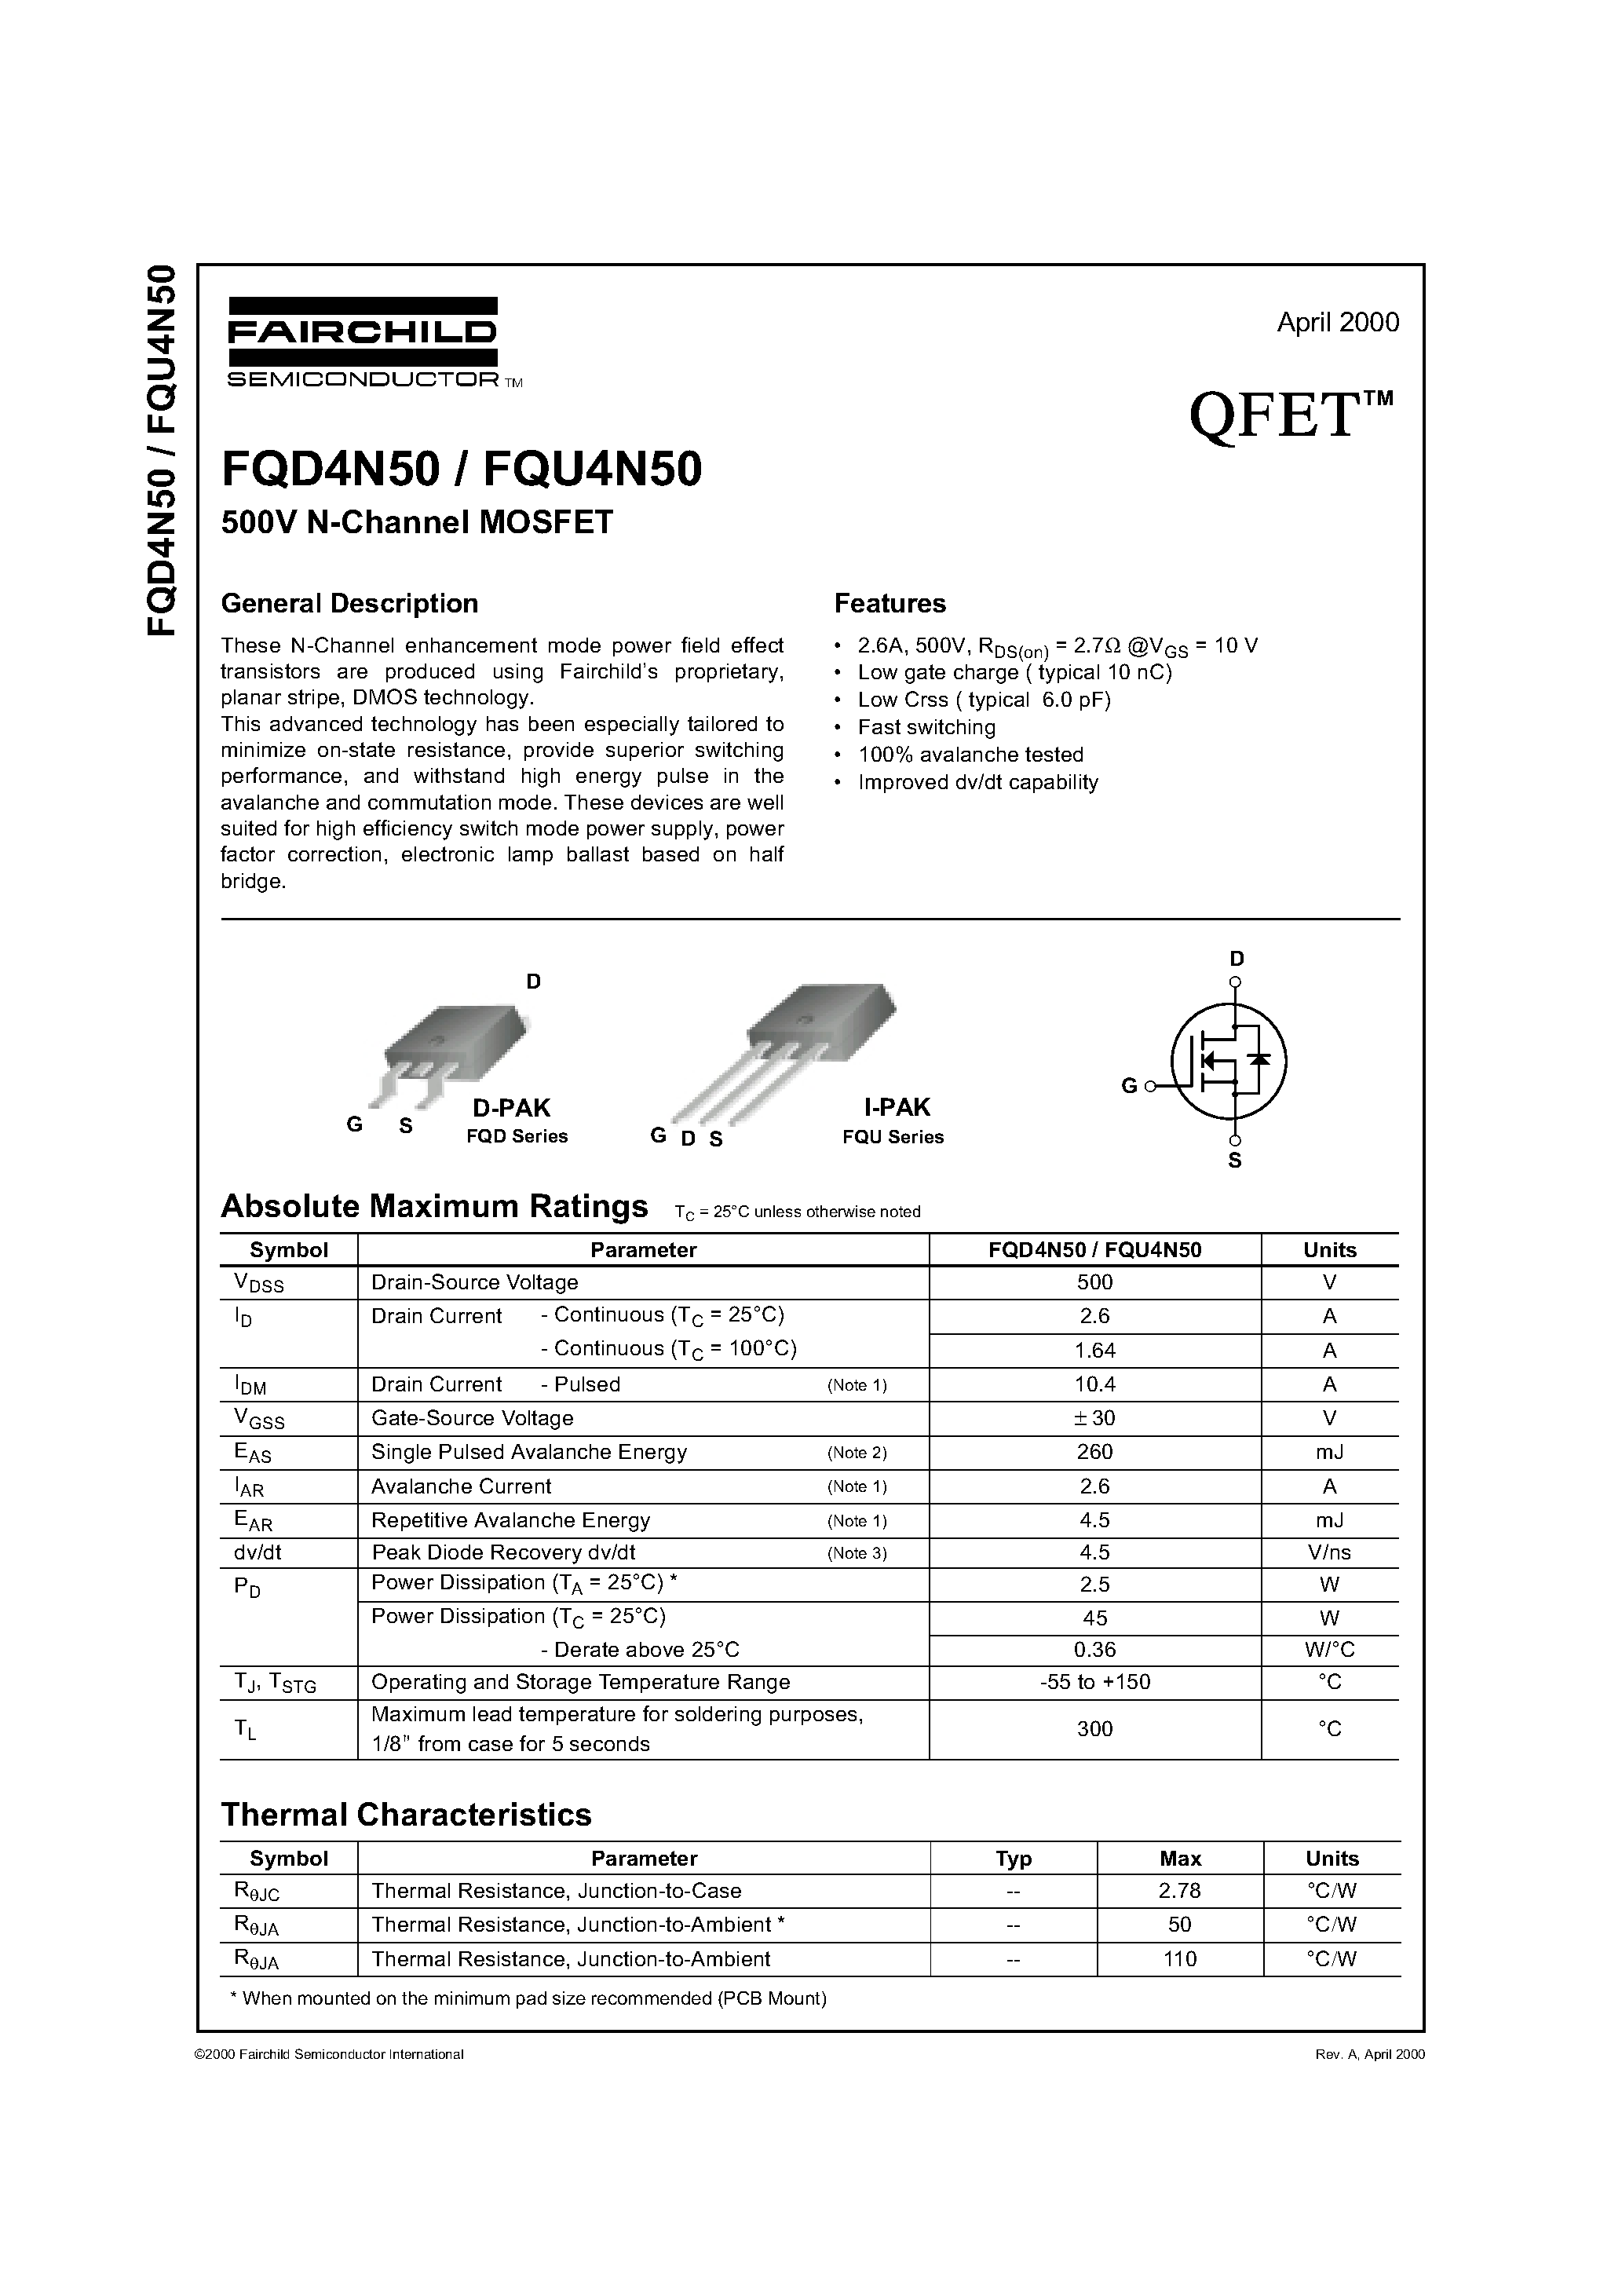 Datasheet FQD4N50 - 500V N-Channel MOSFET page 1